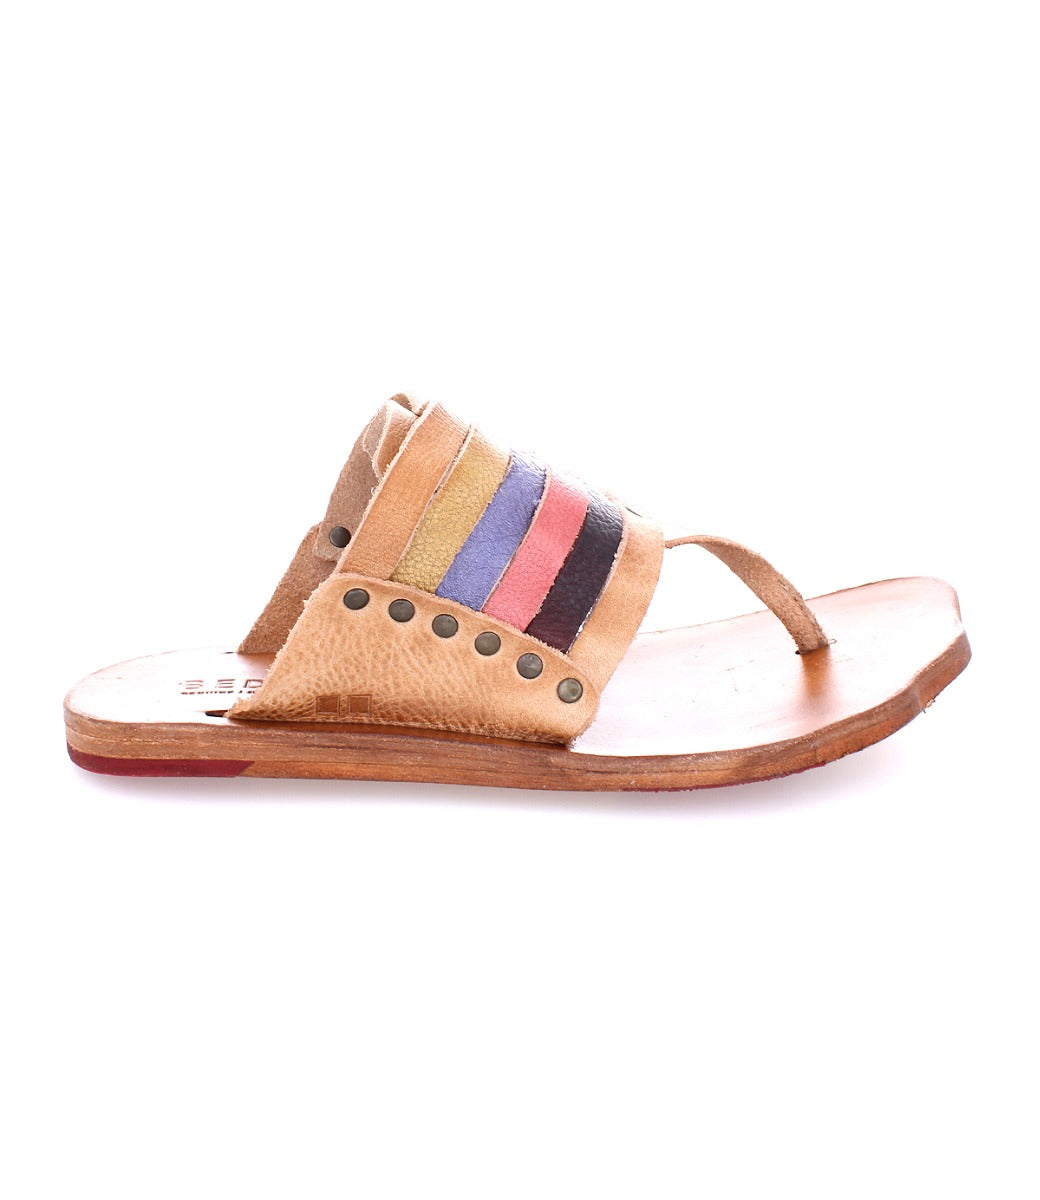 A women's Nemesis sandal with multi-colored straps by Bed Stu.